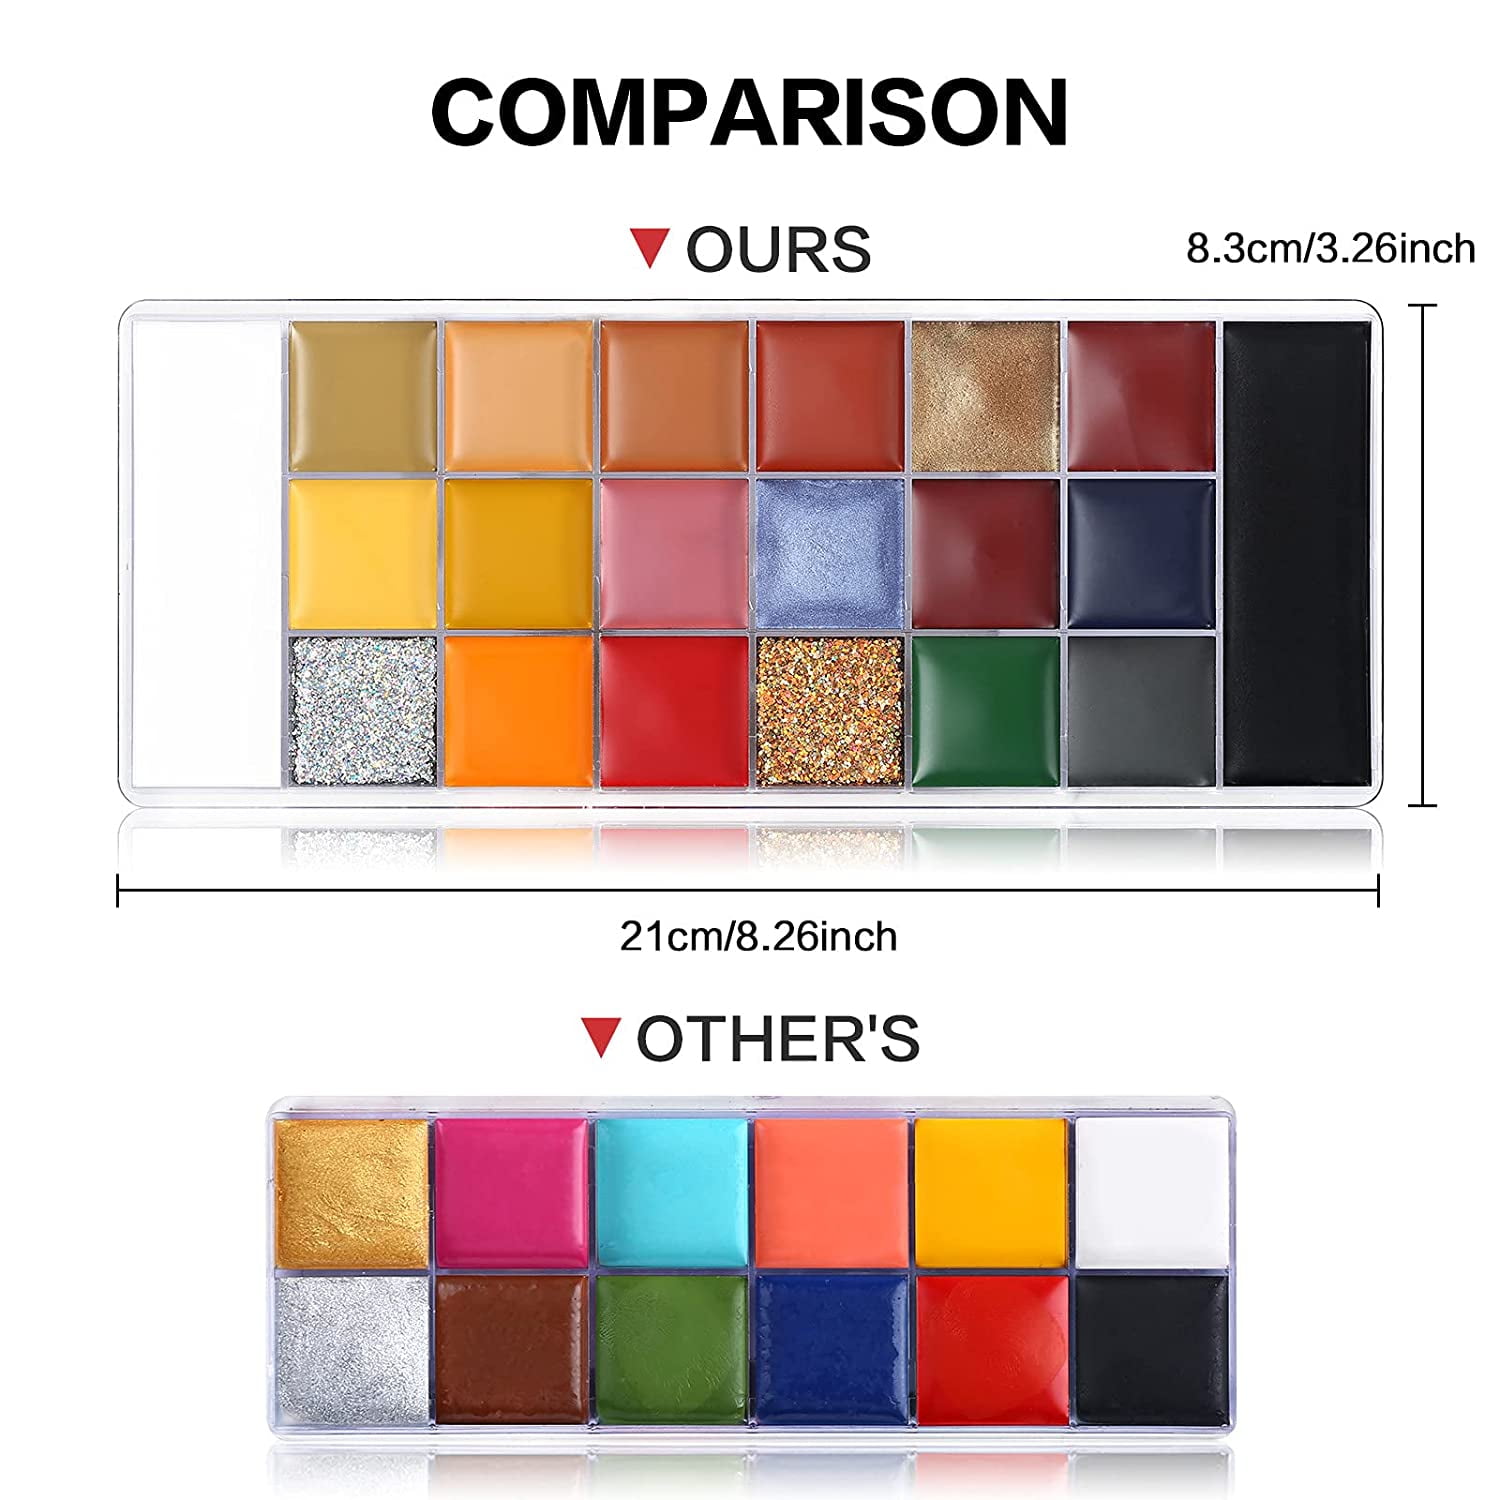 the Athena painting palette from ucanbe #SephoraConcealers